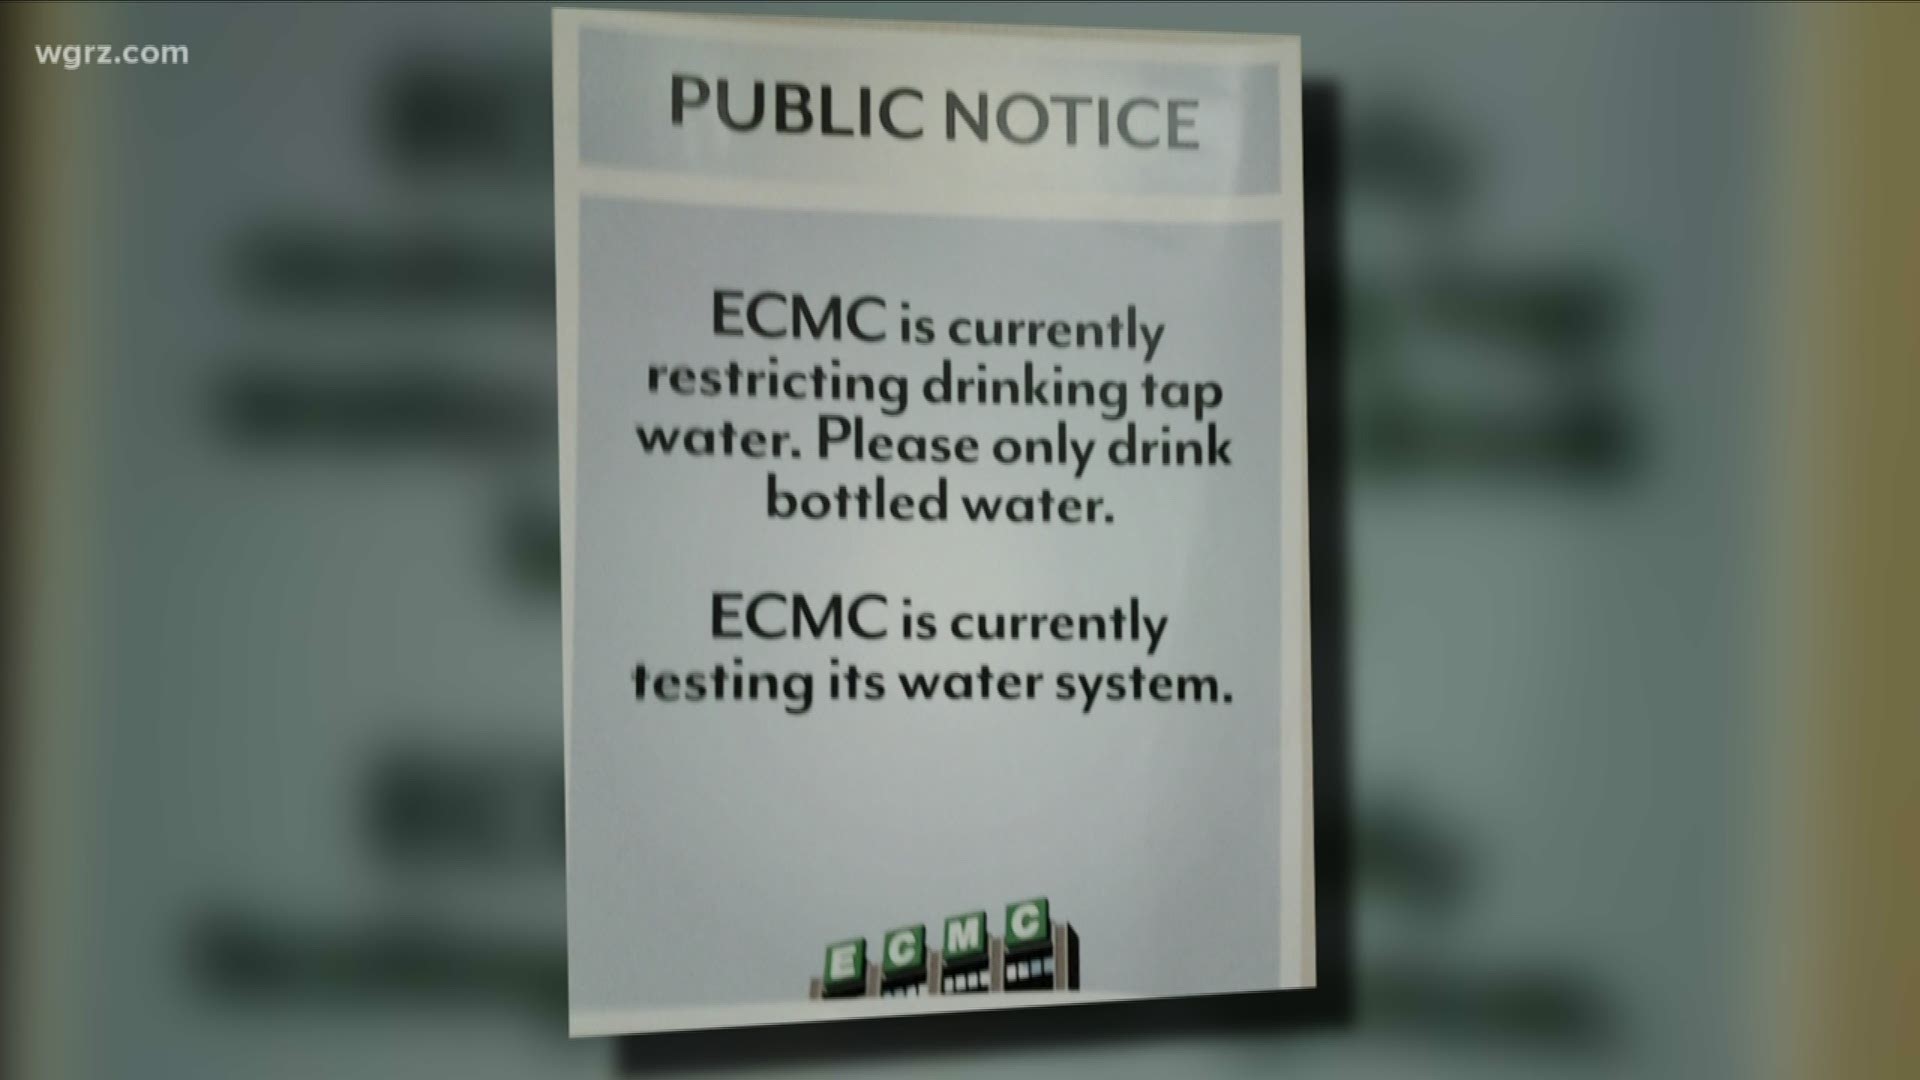 Bottled water recommended at ECMC